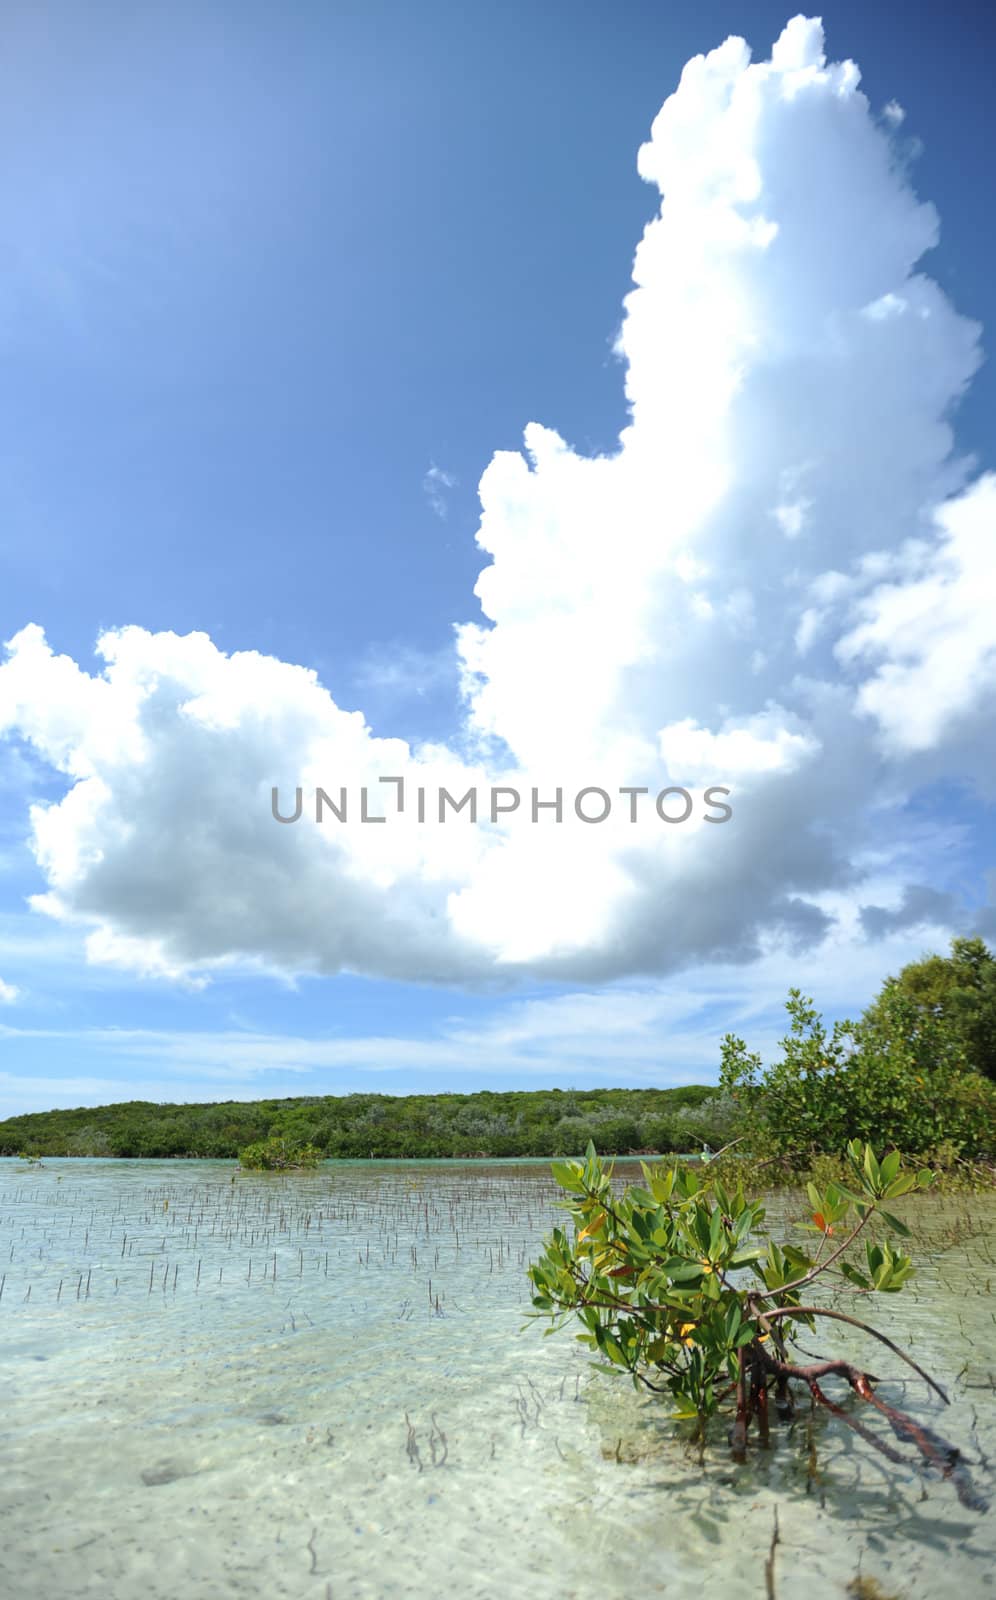 Scenic portrait image of water and tropical plant life in the Bahamas